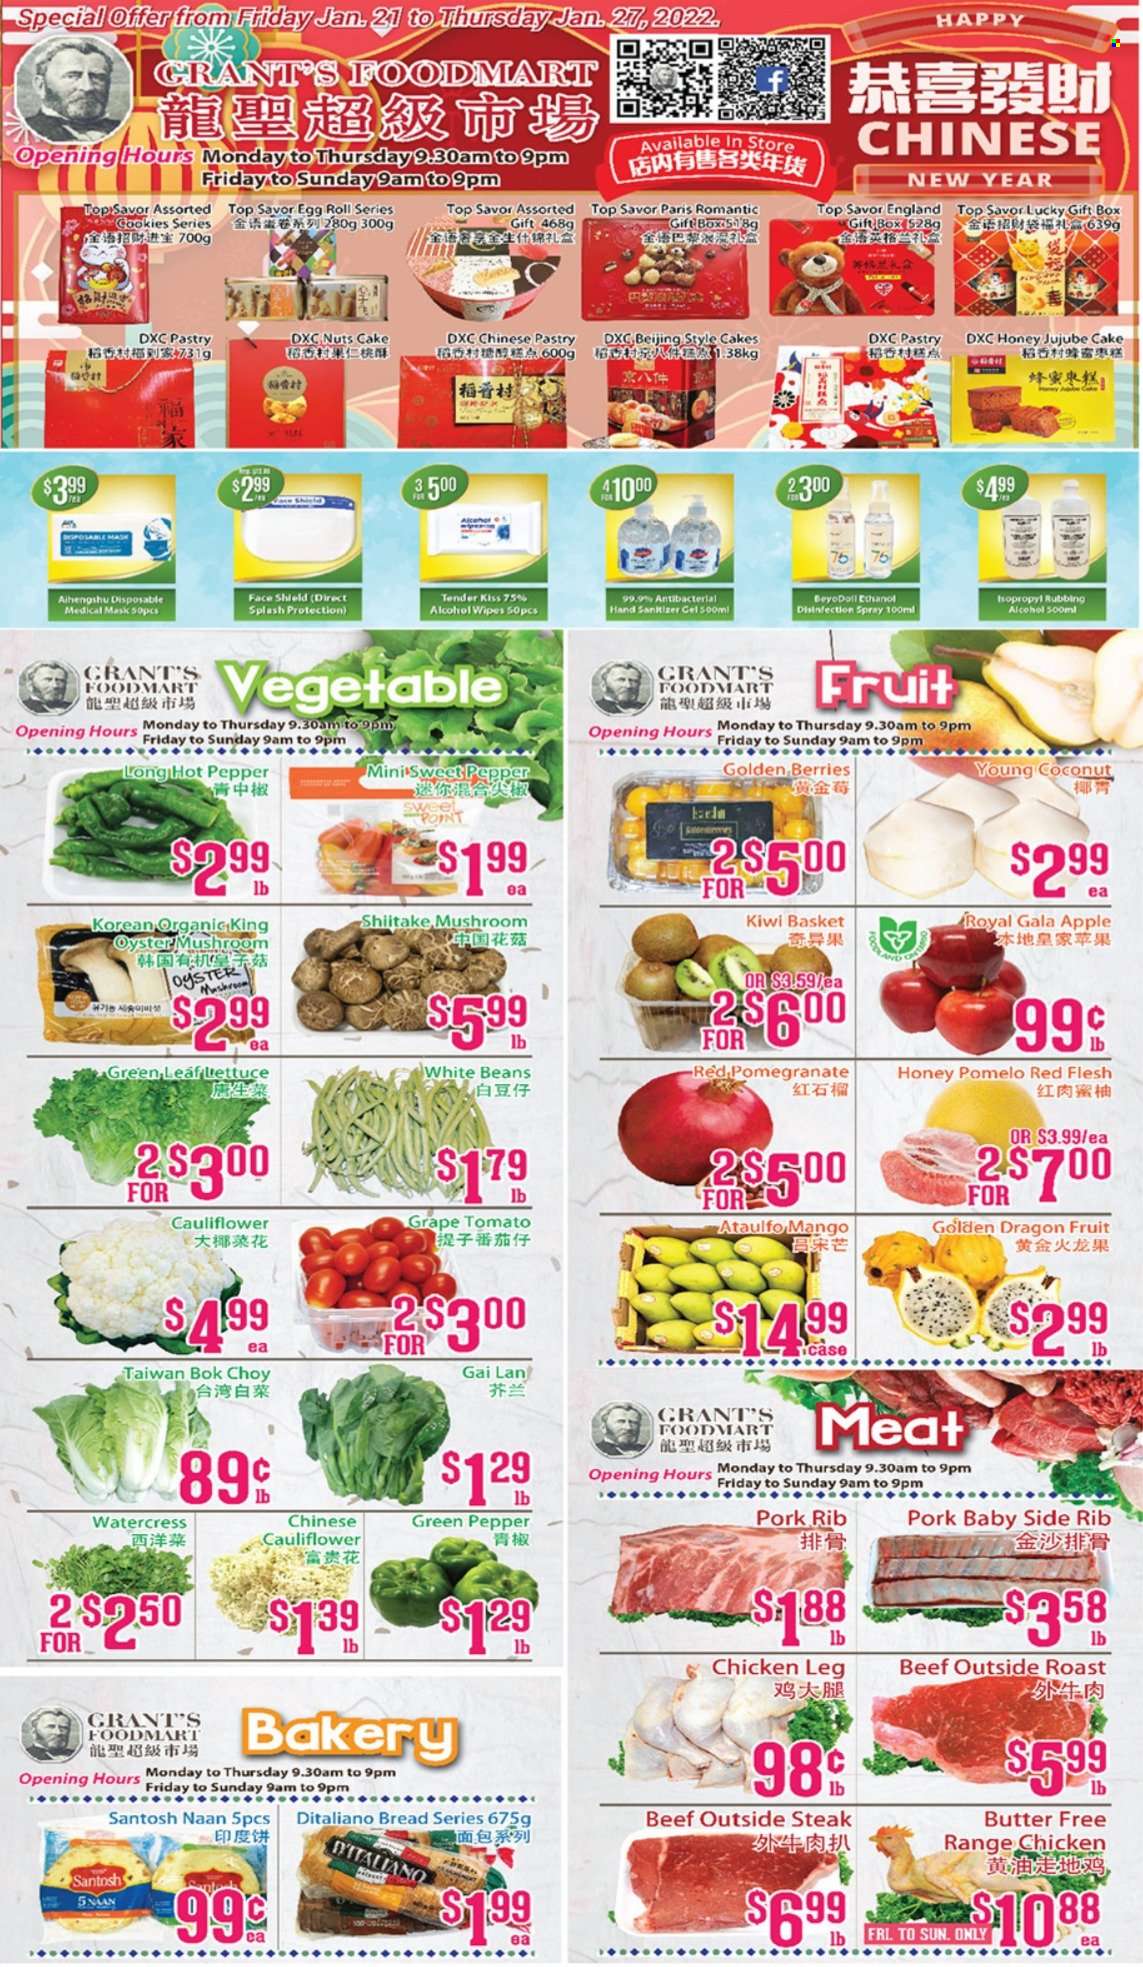 thumbnail - Grant's Foodmart Flyer - January 21, 2022 - January 27, 2022 - Sales products - oyster mushrooms, mushrooms, bread, cake, beans, bok choy, cauliflower, green pepper, Gala, jujube, coconut, pomegranate, pomelo, dragon fruit, oysters, egg rolls, eggs, butter, cookies, watercress, honey, Grant's, chicken legs, wipes, hand sanitizer, kiwi, steak. Page 1.